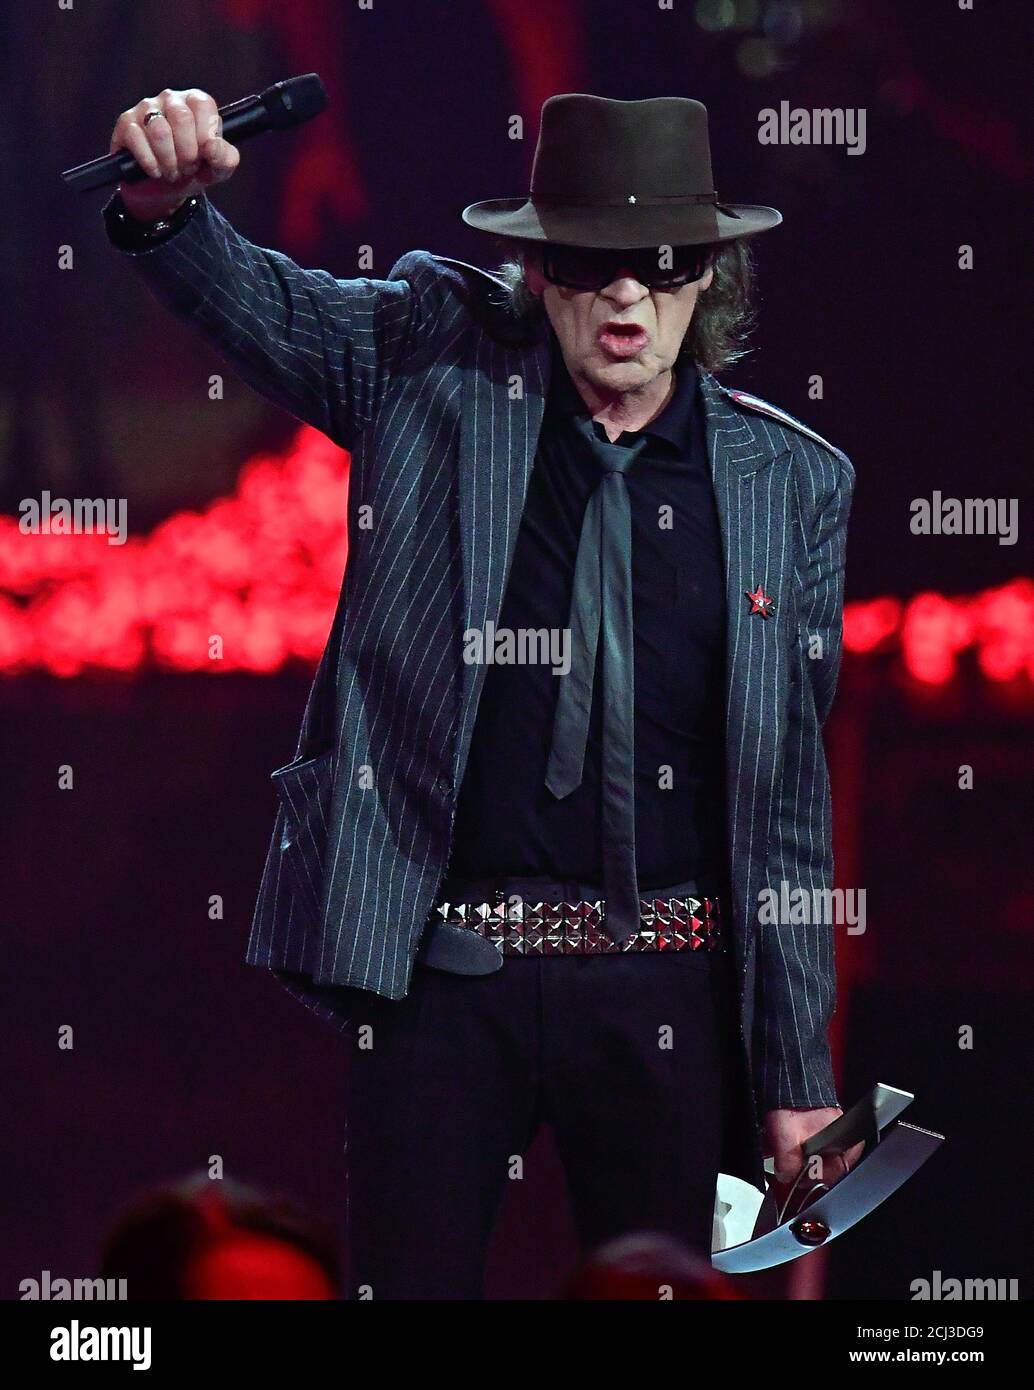 German singer Udo Lindenberg performs during the 2017 Echo Music Award  ceremony in Berlin, Germany April 6, 2017. REUTERS/Tobias Schwarz/Pool  Stock Photo - Alamy